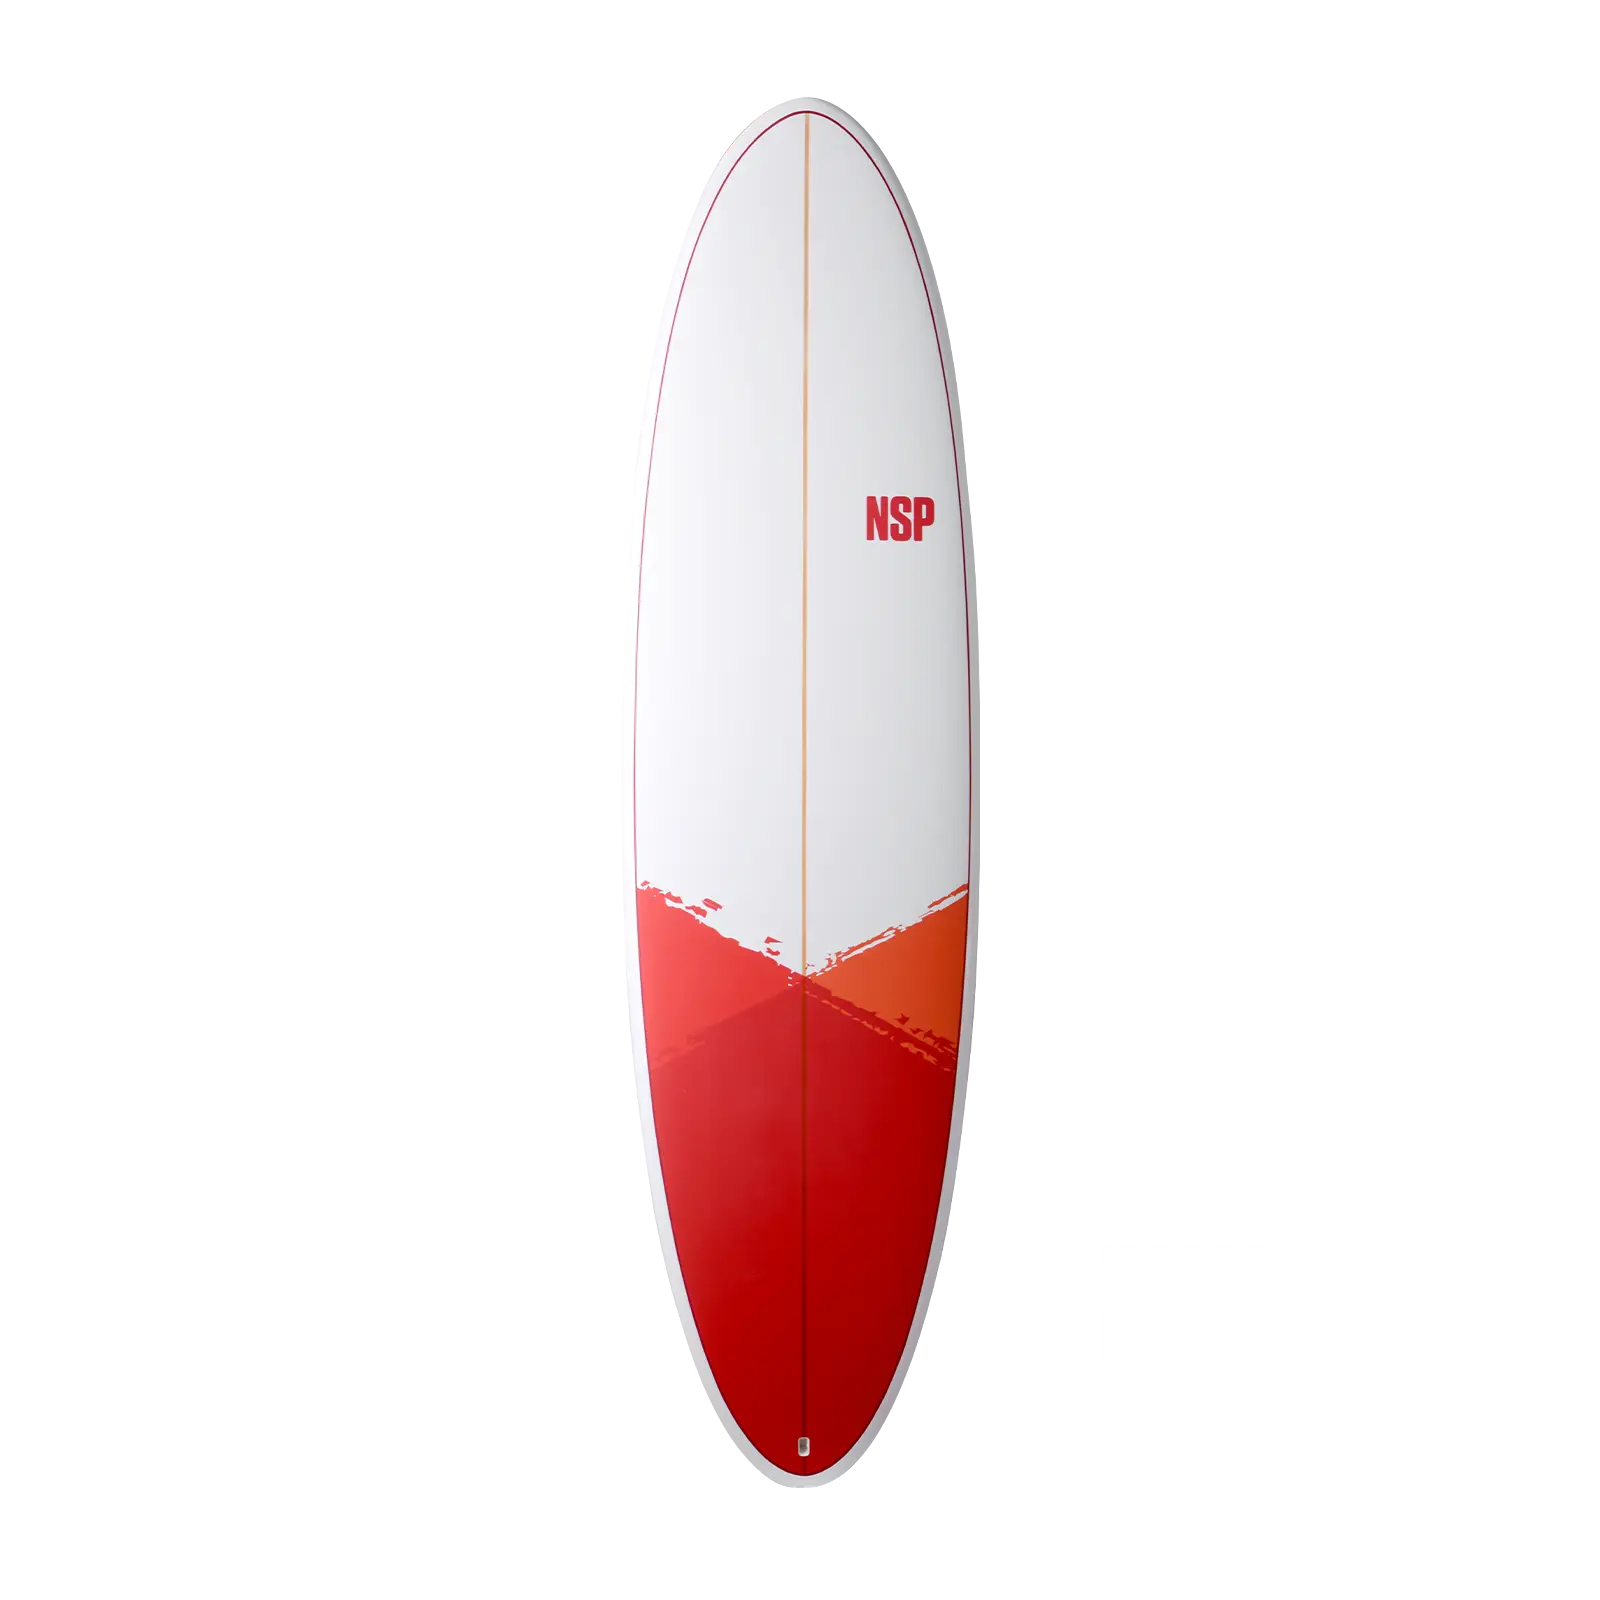 NSP Funboard E+ 6'8" | 42.1 L Red Water NSP Europe